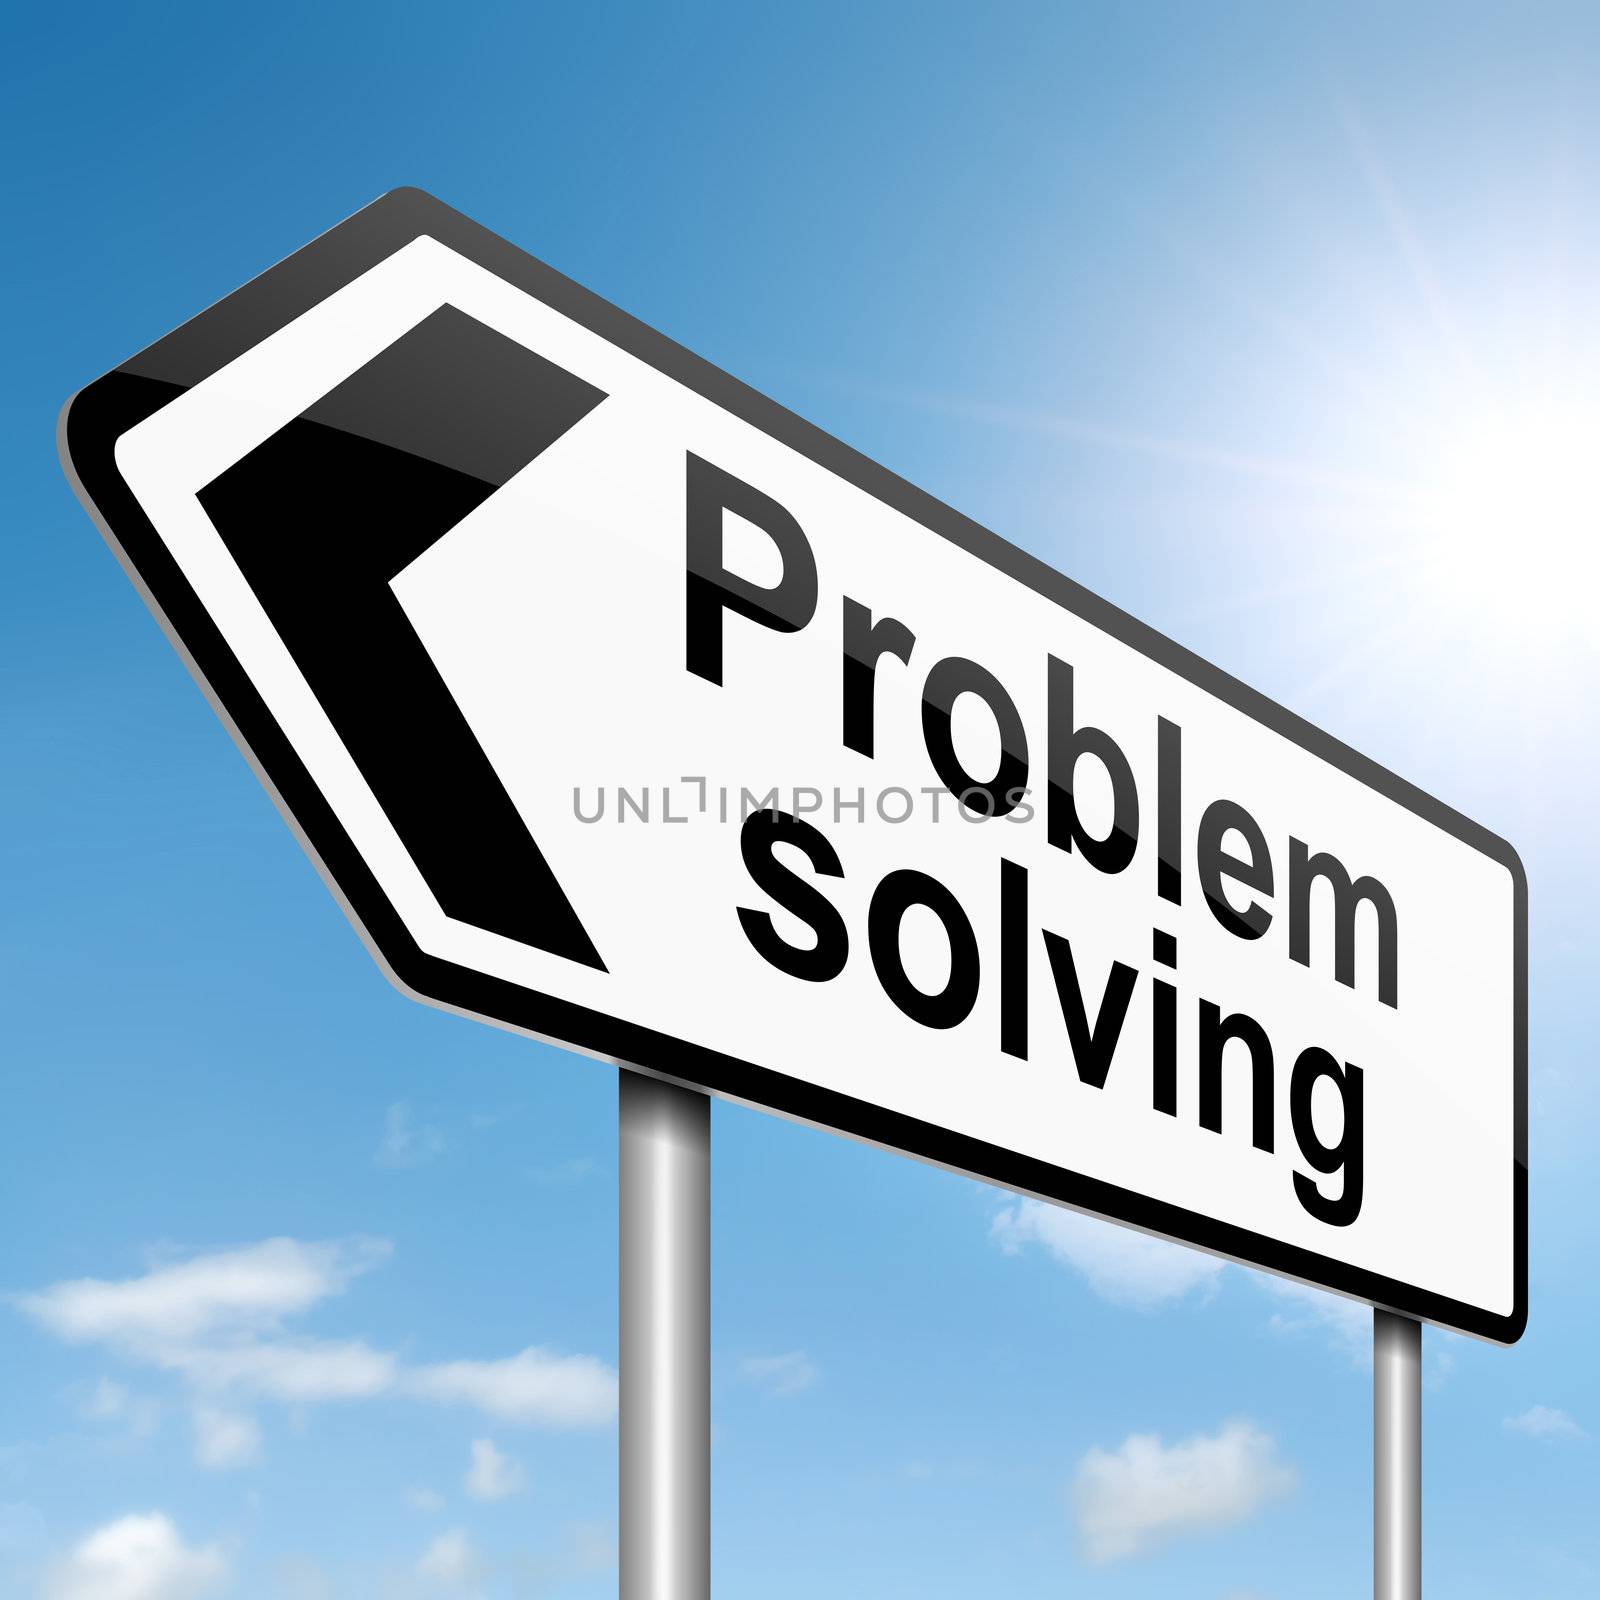 Illustration depicting a roadsign with 'a problem shared' concept. Blue sky background.